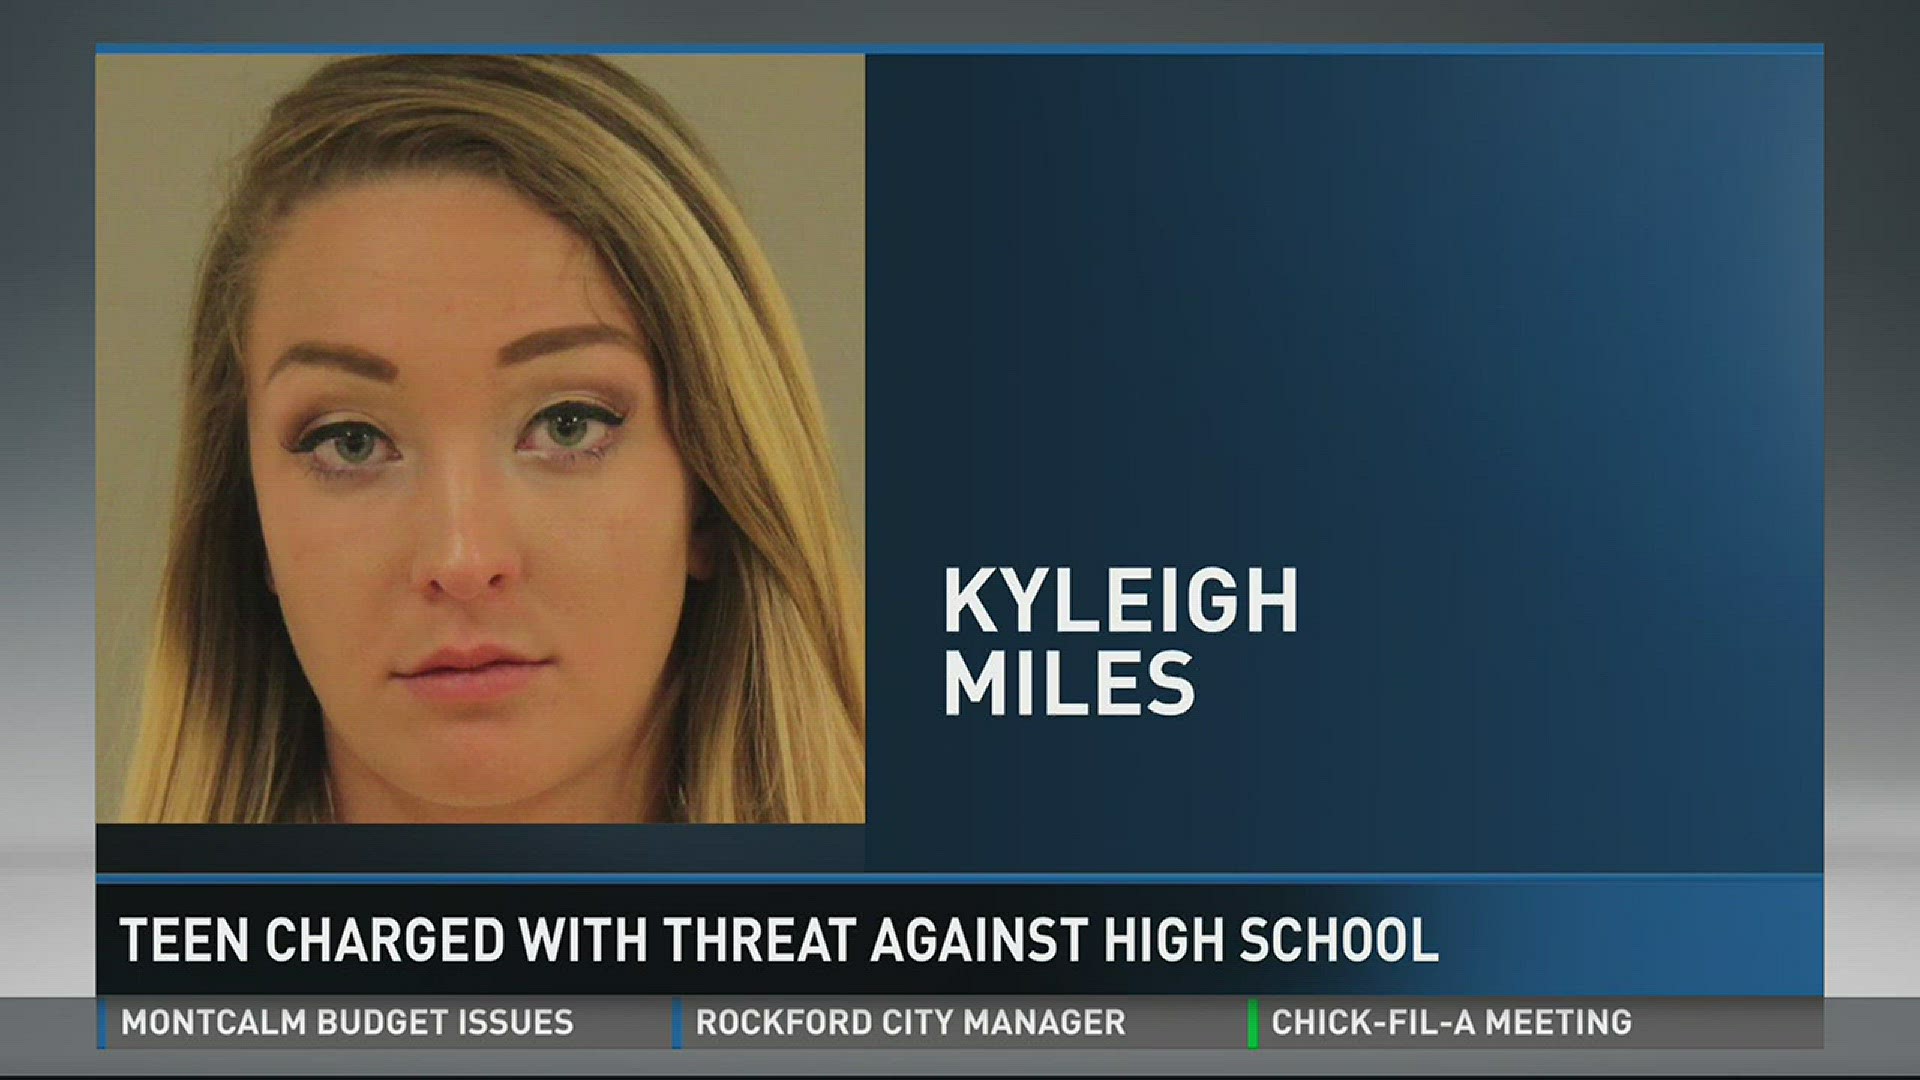 Kyleigh Miles is accused of using social media to post a threat against Grandville High School on April 28.